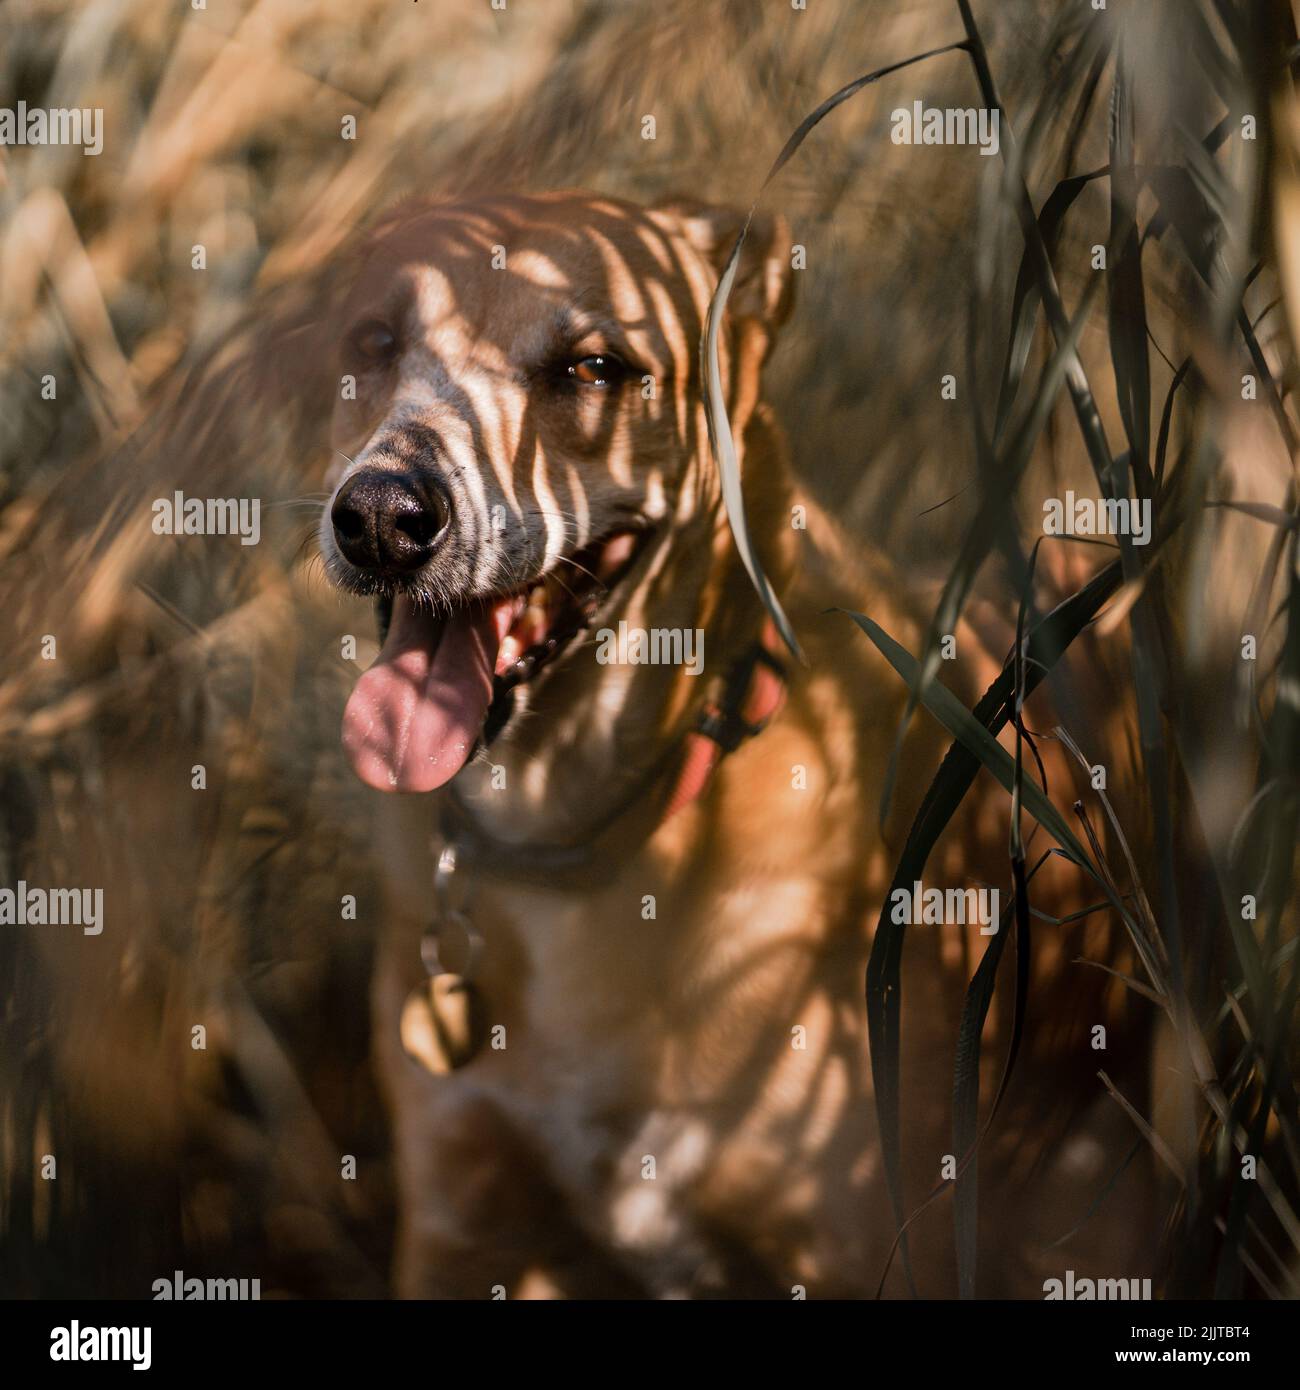 An Indian Pariah dog in the forest Stock Photo